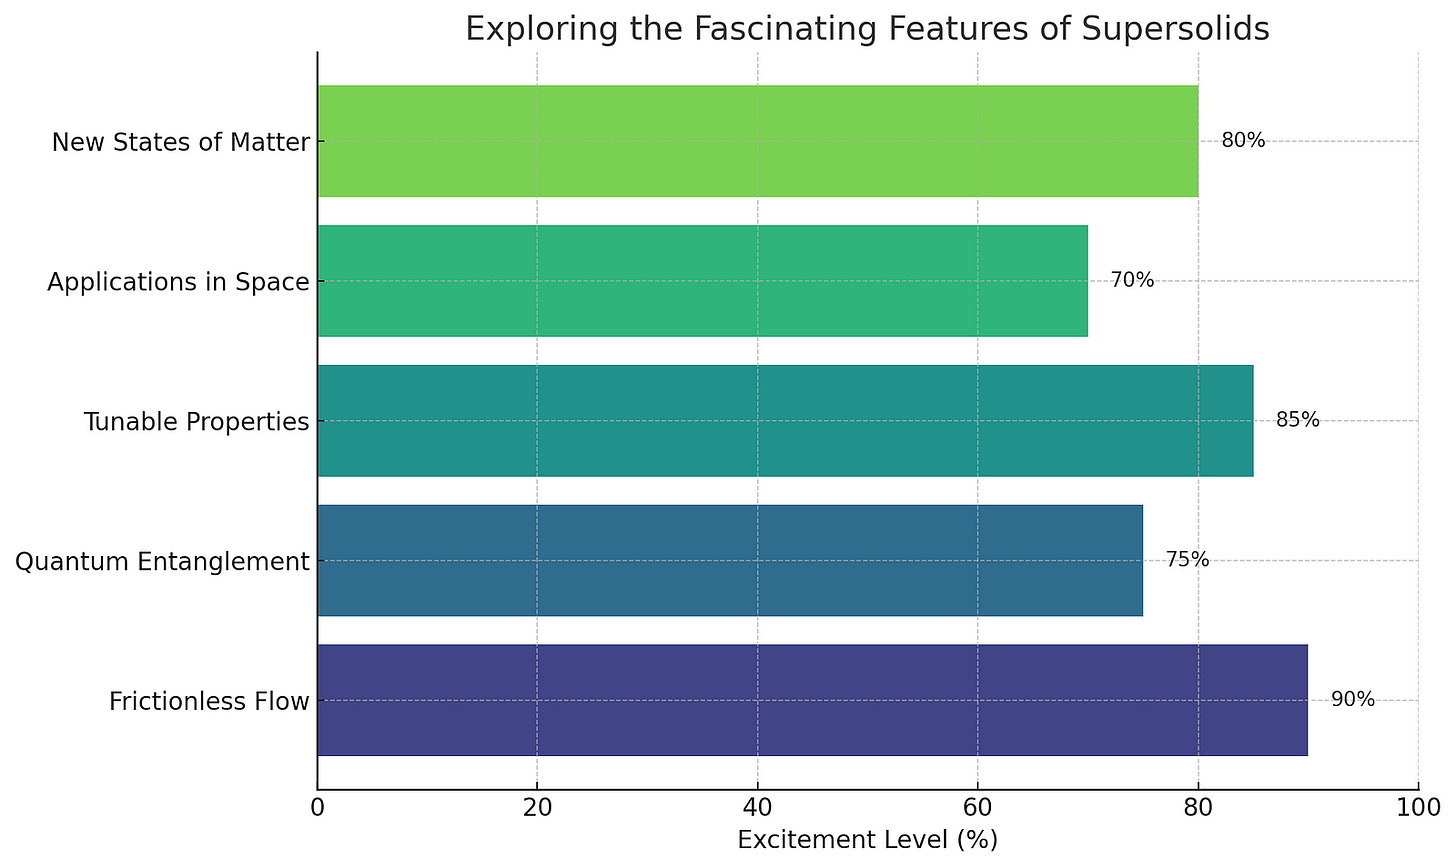 Horizontal bar graph displaying excitement levels for various properties of supersolids. The properties include Frictionless Flow at 90%, Quantum Entanglement at 75%, Tunable Properties at 85%, Applications in Space at 70%, and New States of Matter at 80%.